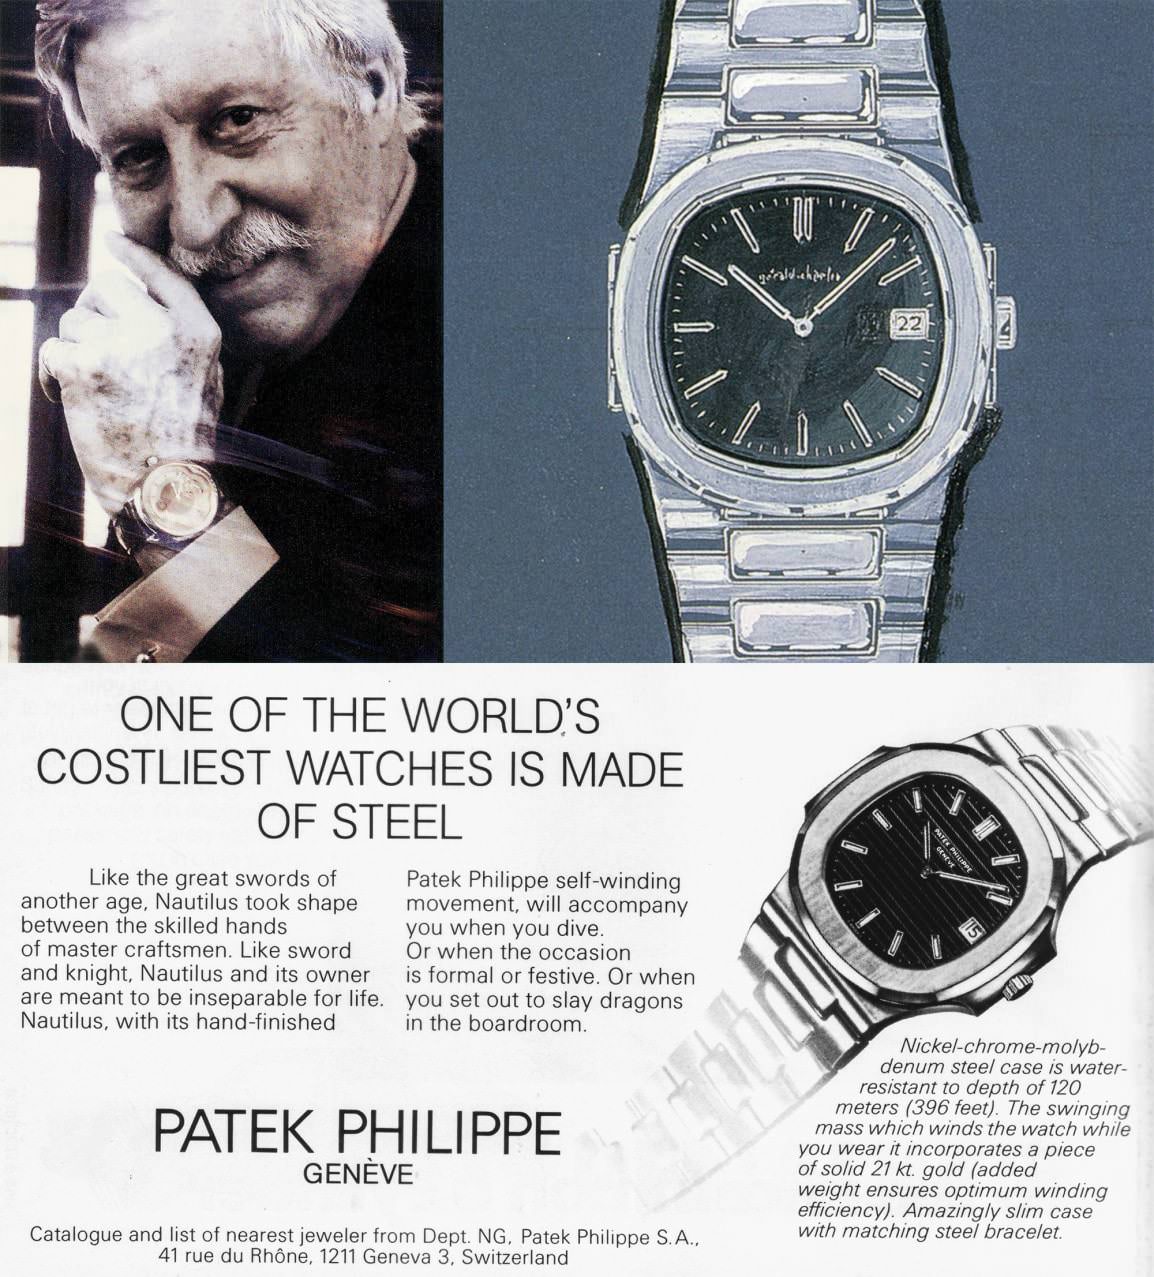 Why is the Patek Philippe Nautilus Expensive?